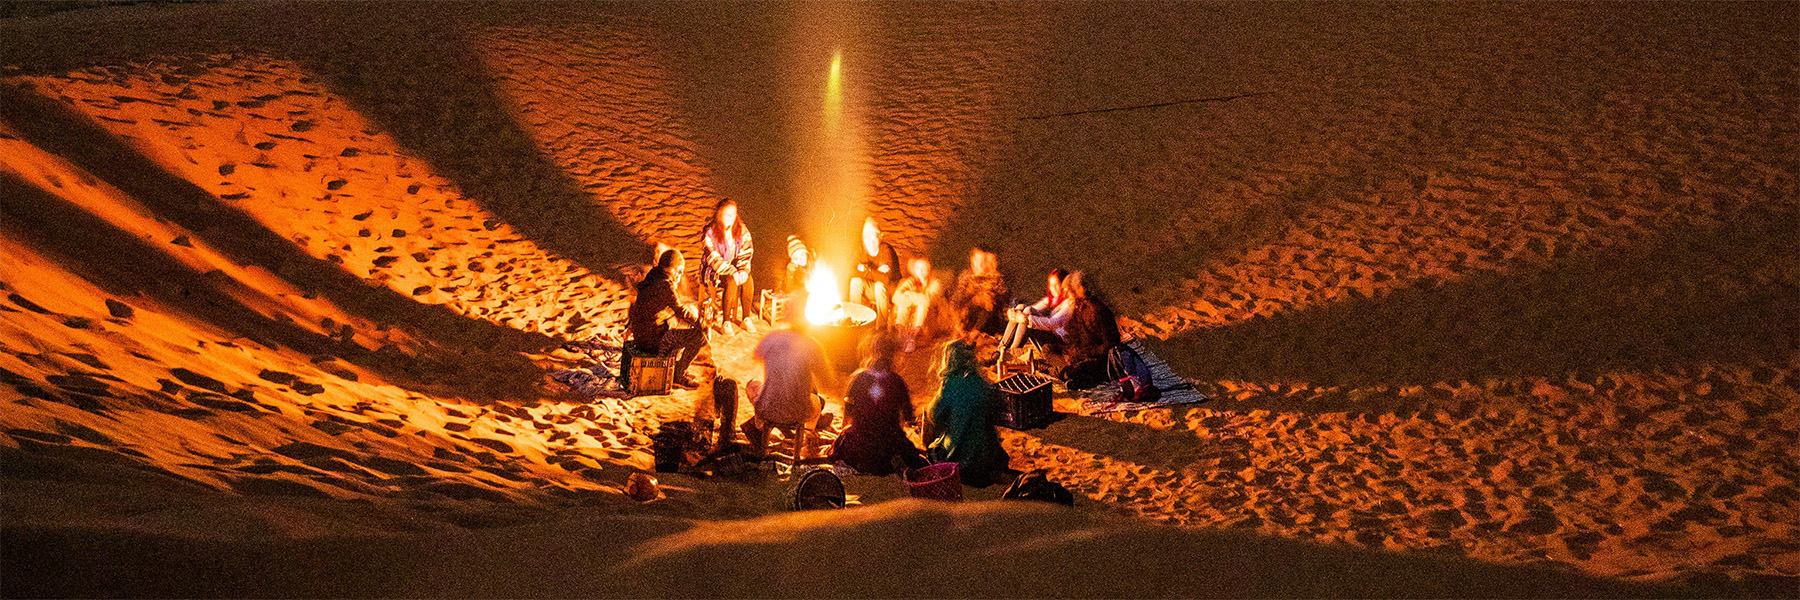 people around a campfire in the desert